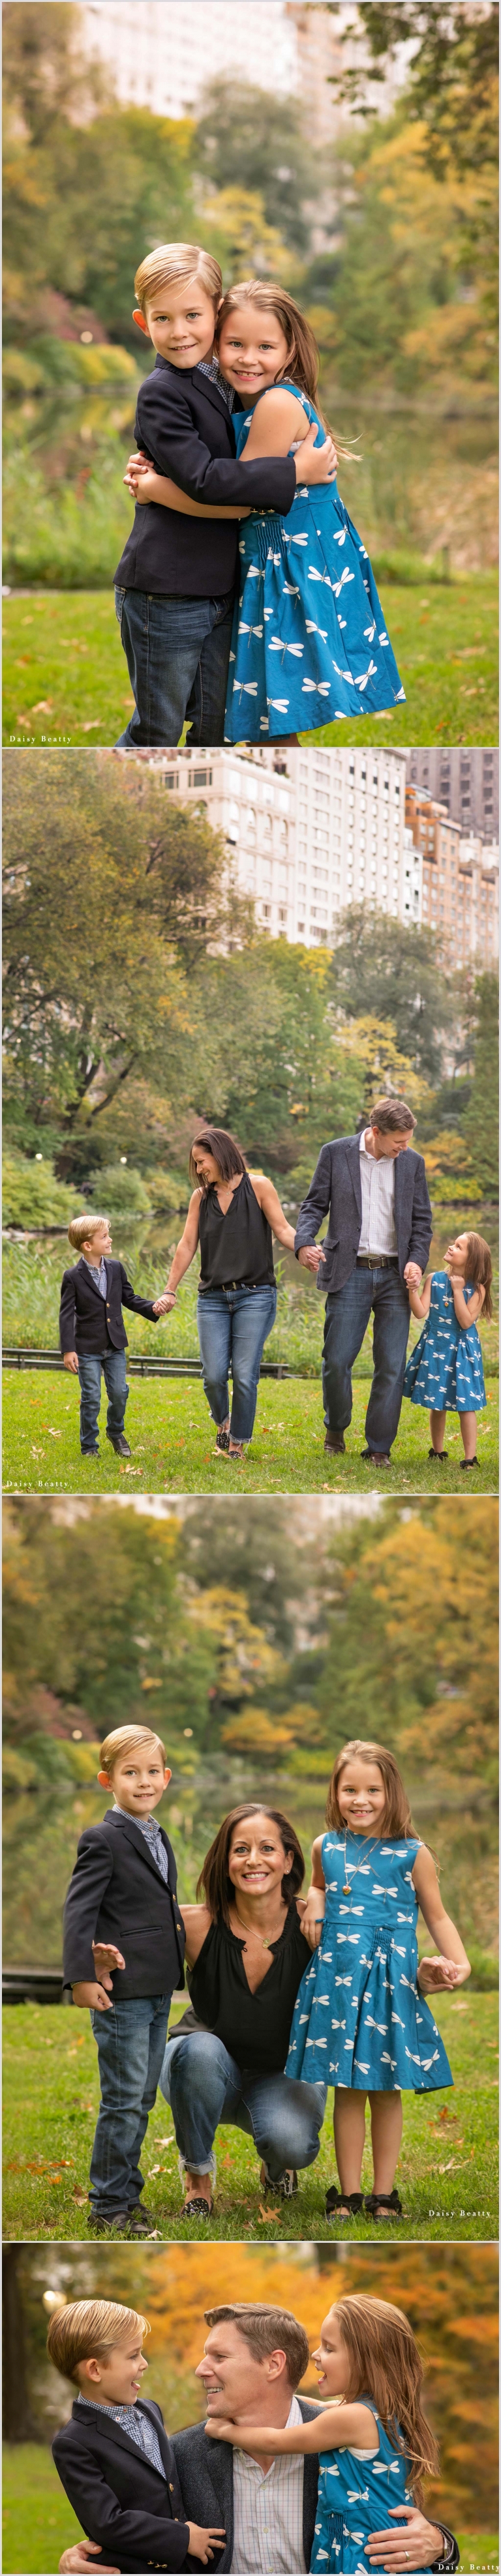 central park family photo session